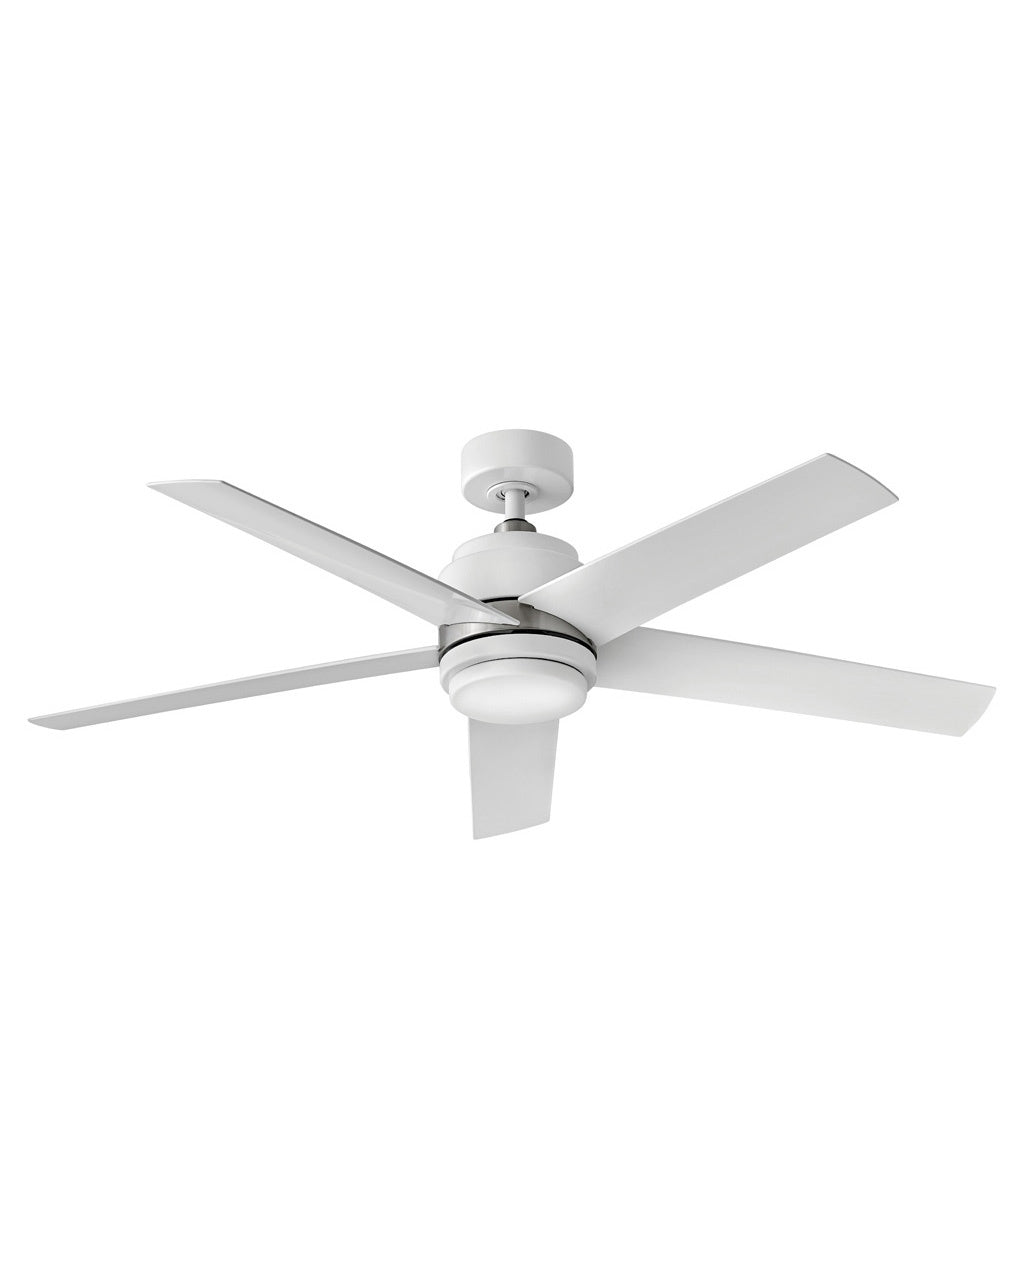 Tier 54" LED Ceiling Fan in Appliance White from Hinkley Lighting, item number 902054FAW-LWA